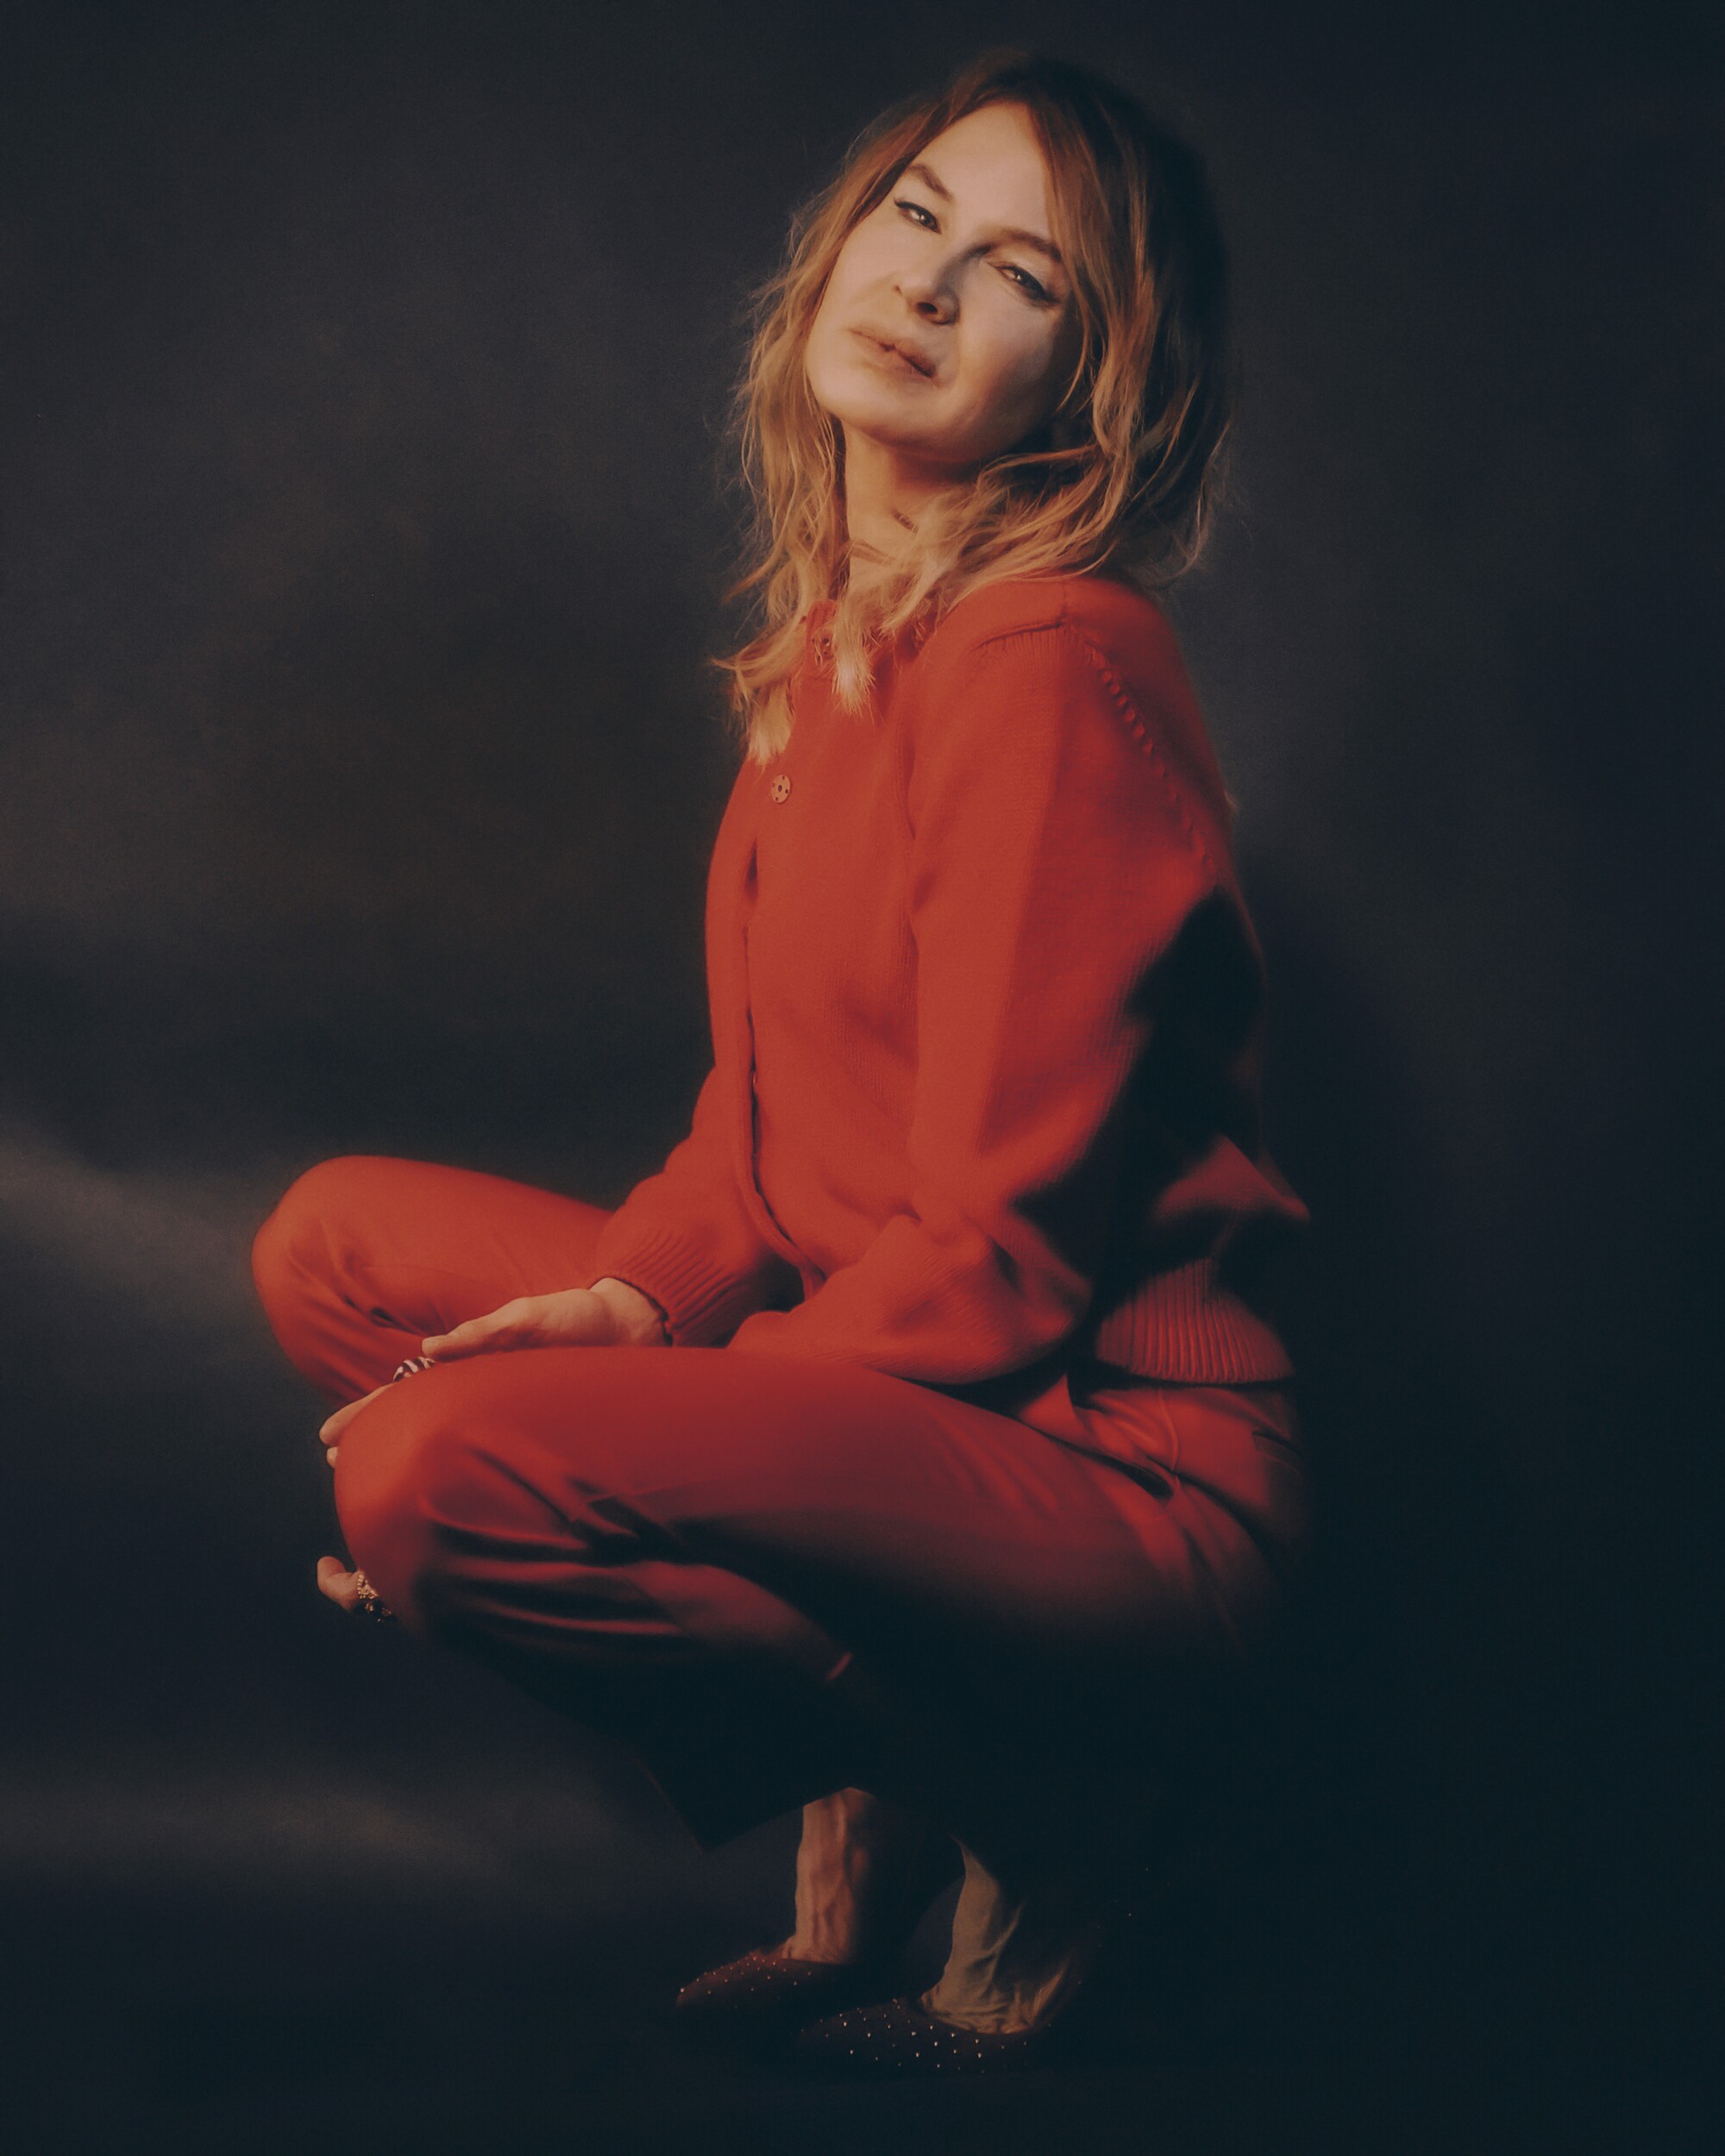 A woman in a red outfit poses in a crouch for a portrait